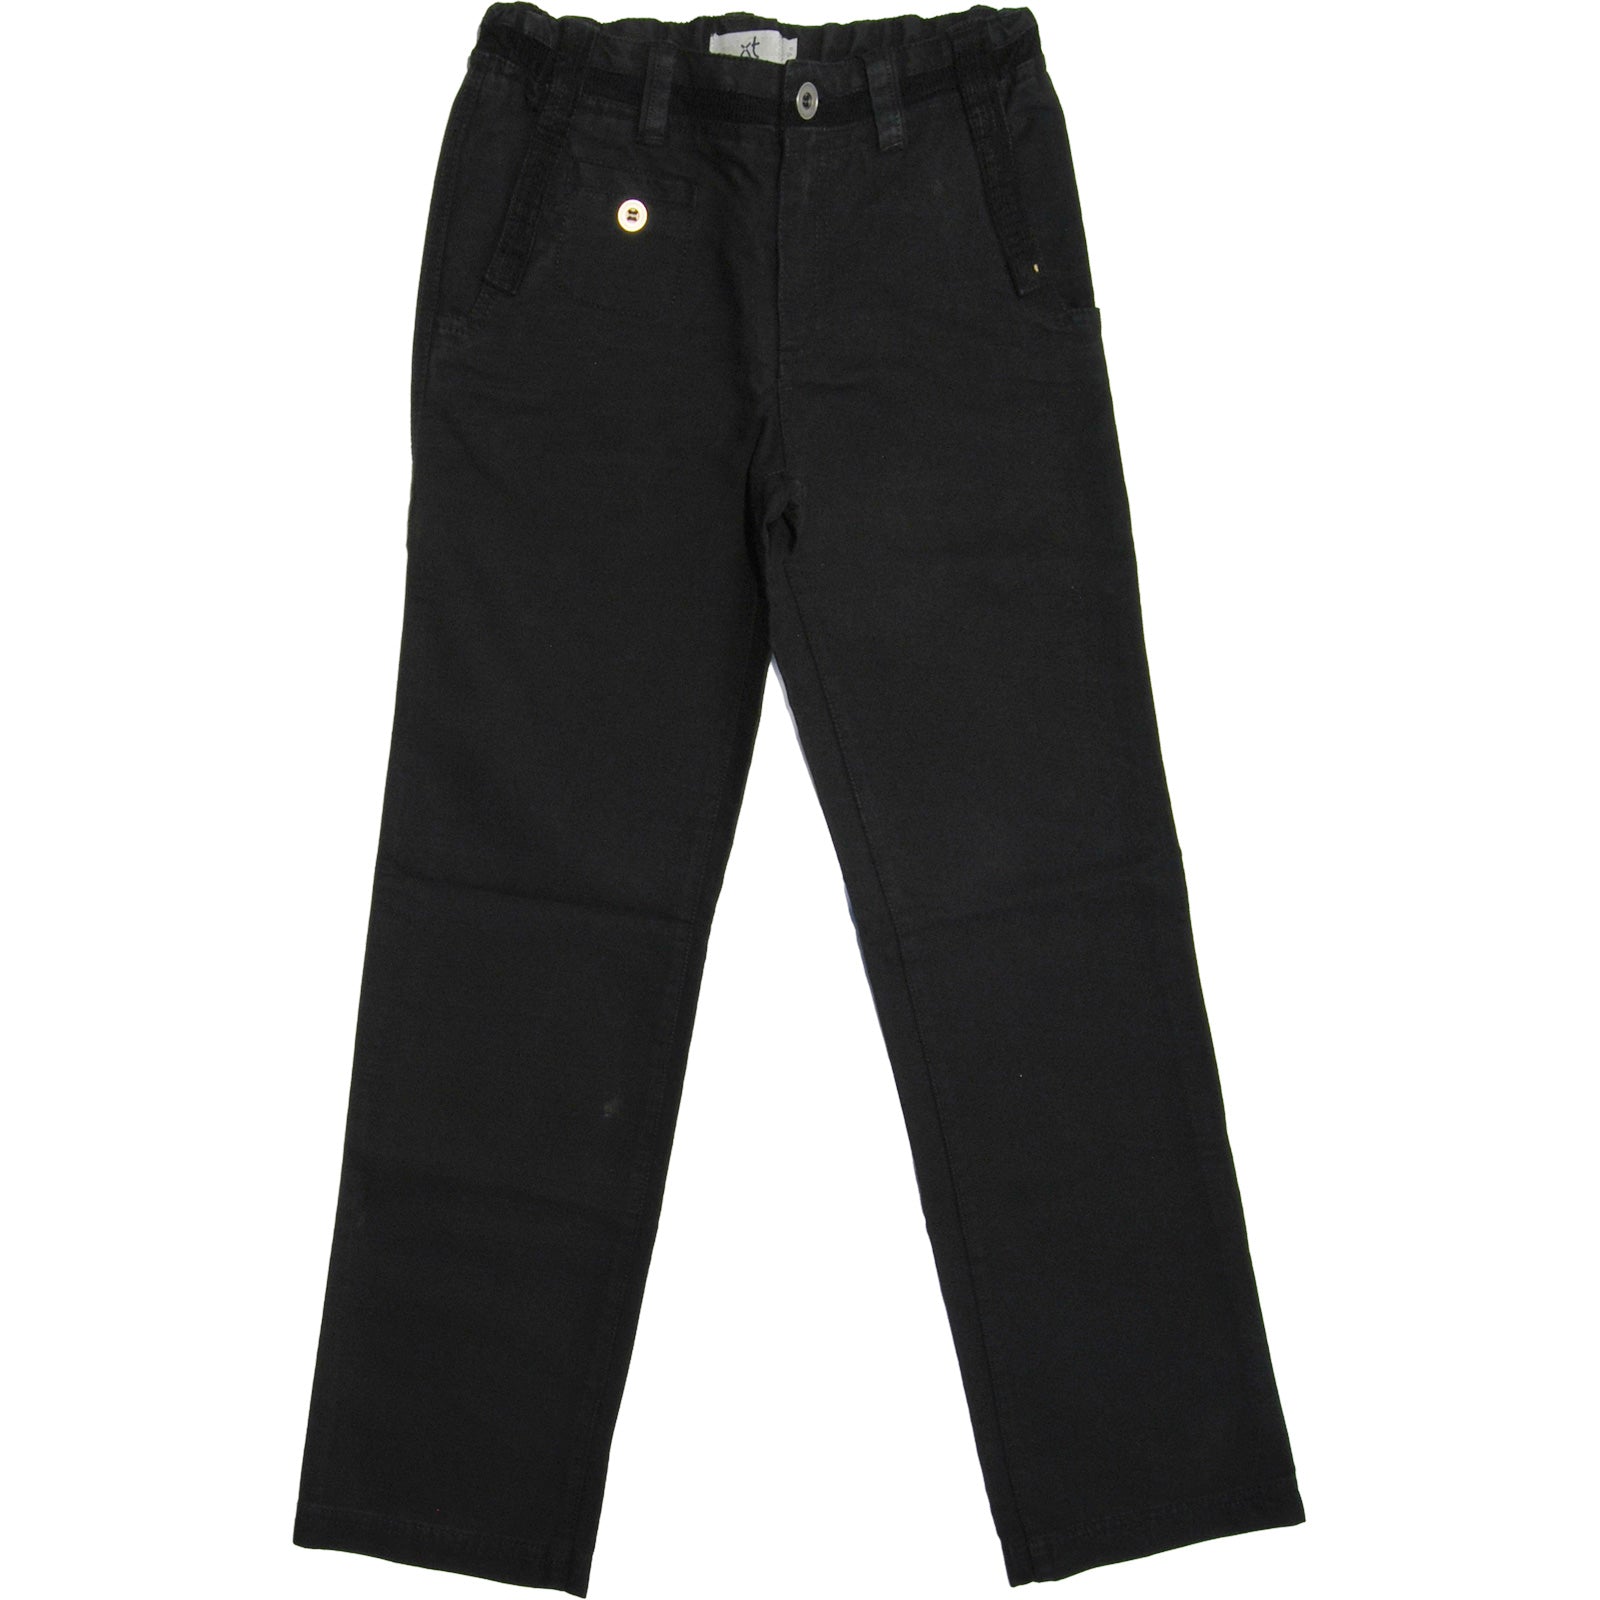 
  Regular cut trousers from the children's clothing line Mirtillo, front and back pockets, velve...